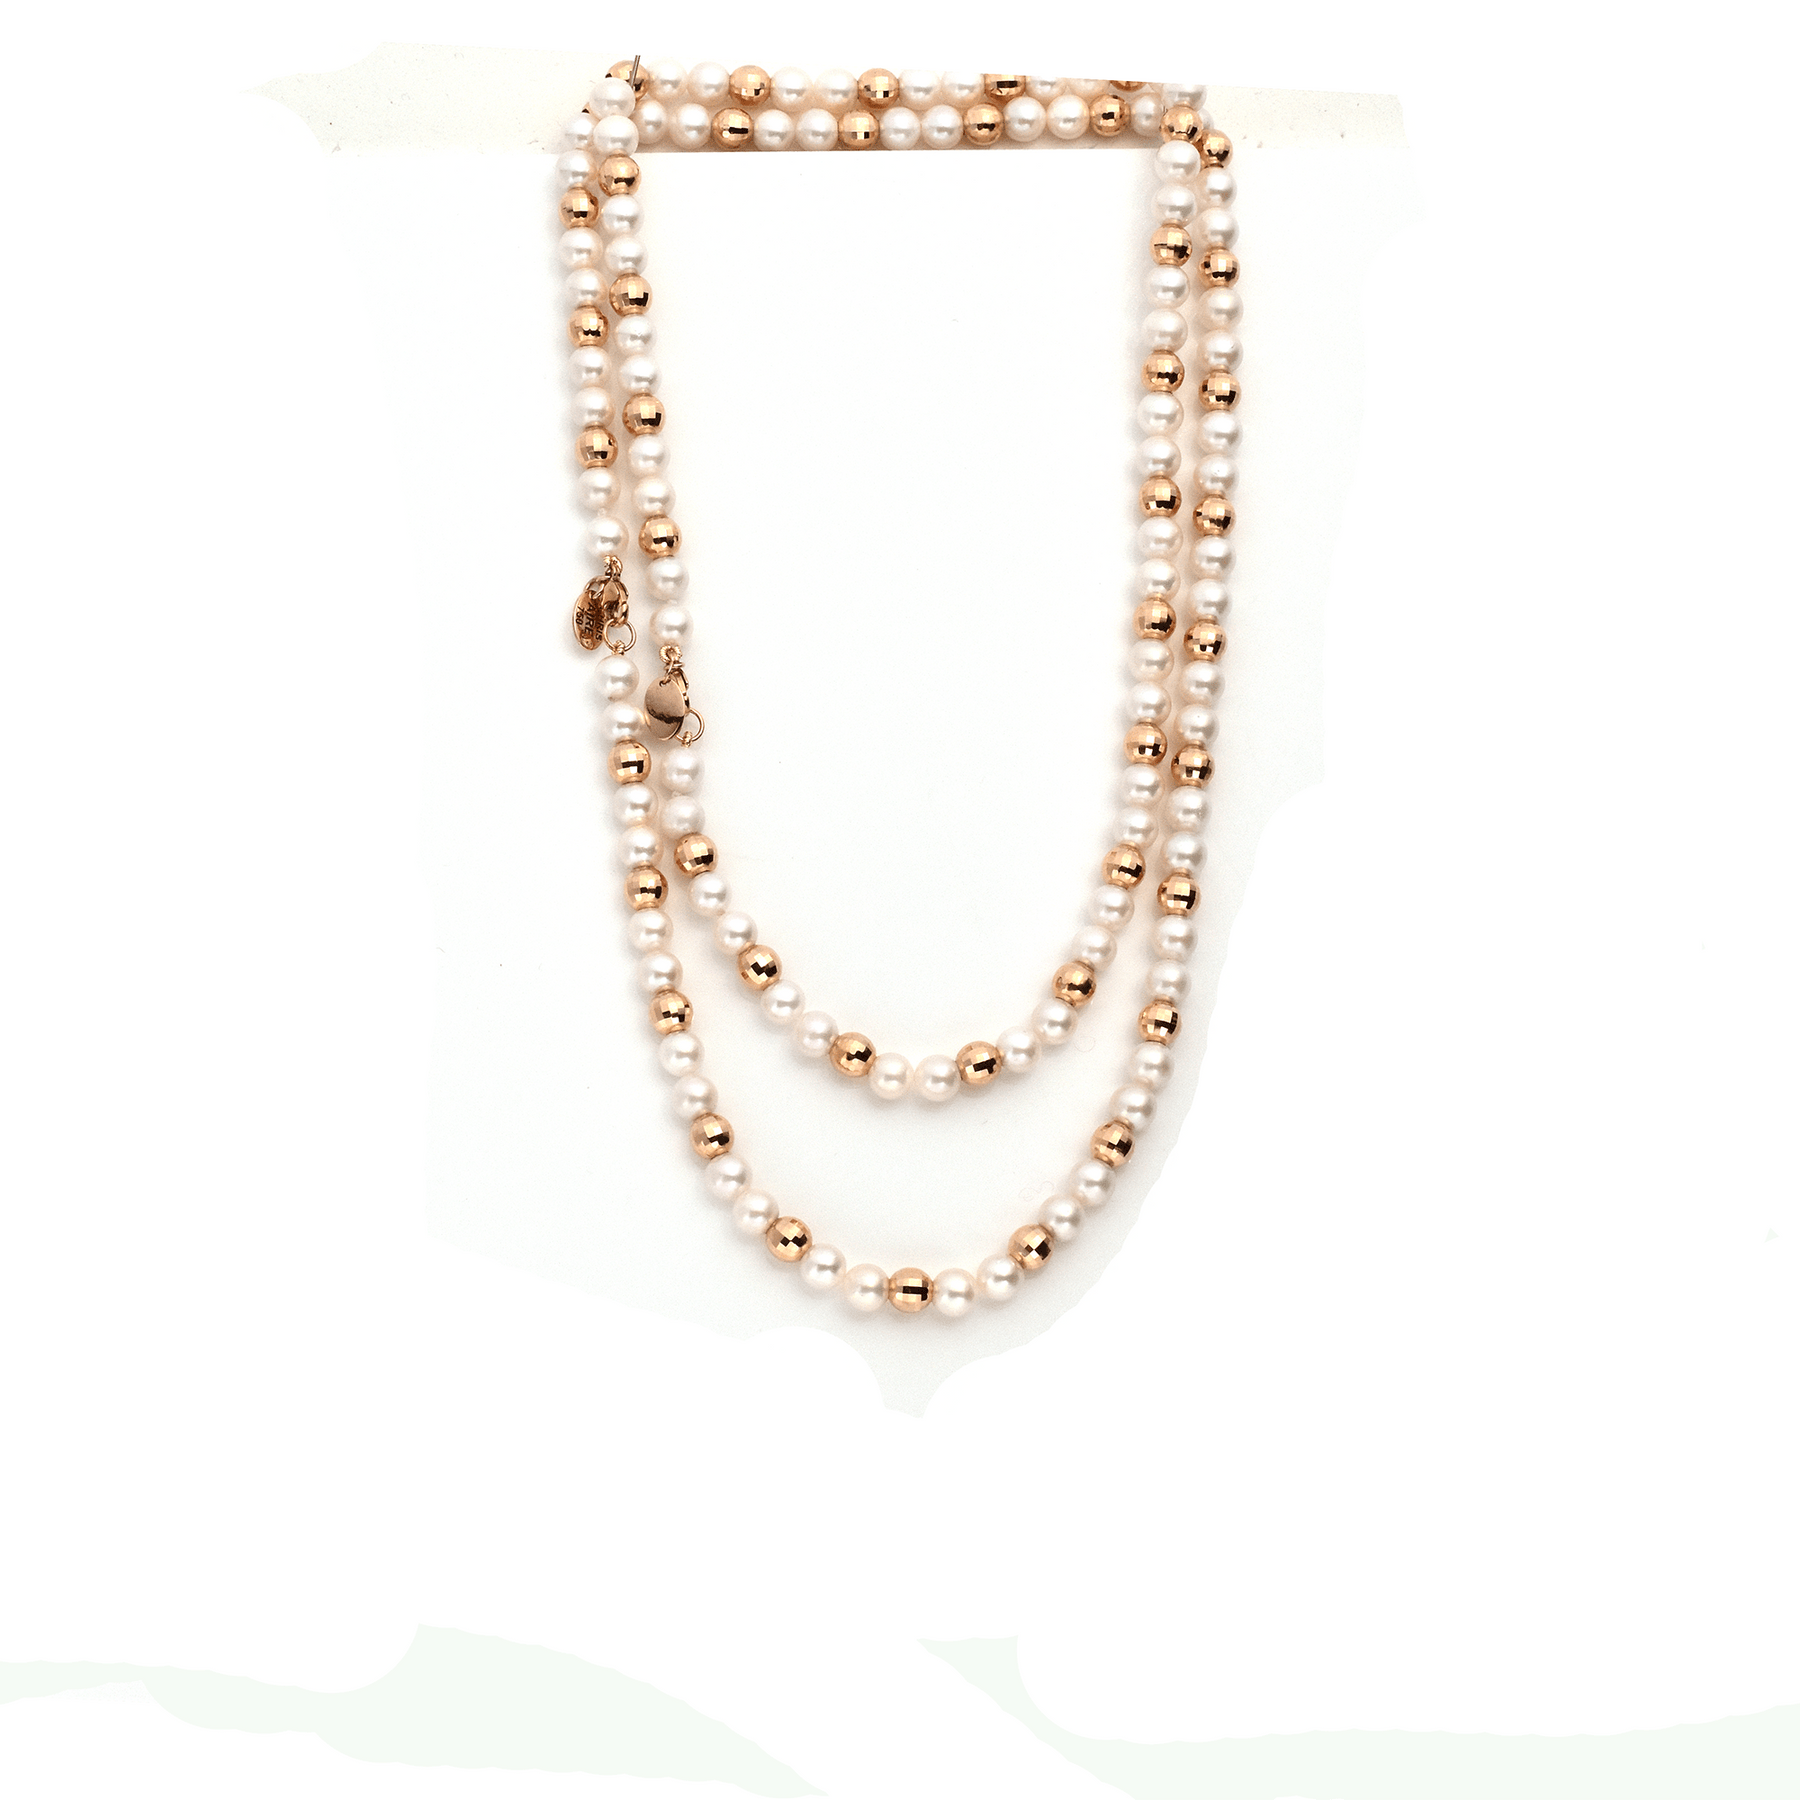 Pearlngold- Cultured Pearls and Gold Beads Necklace